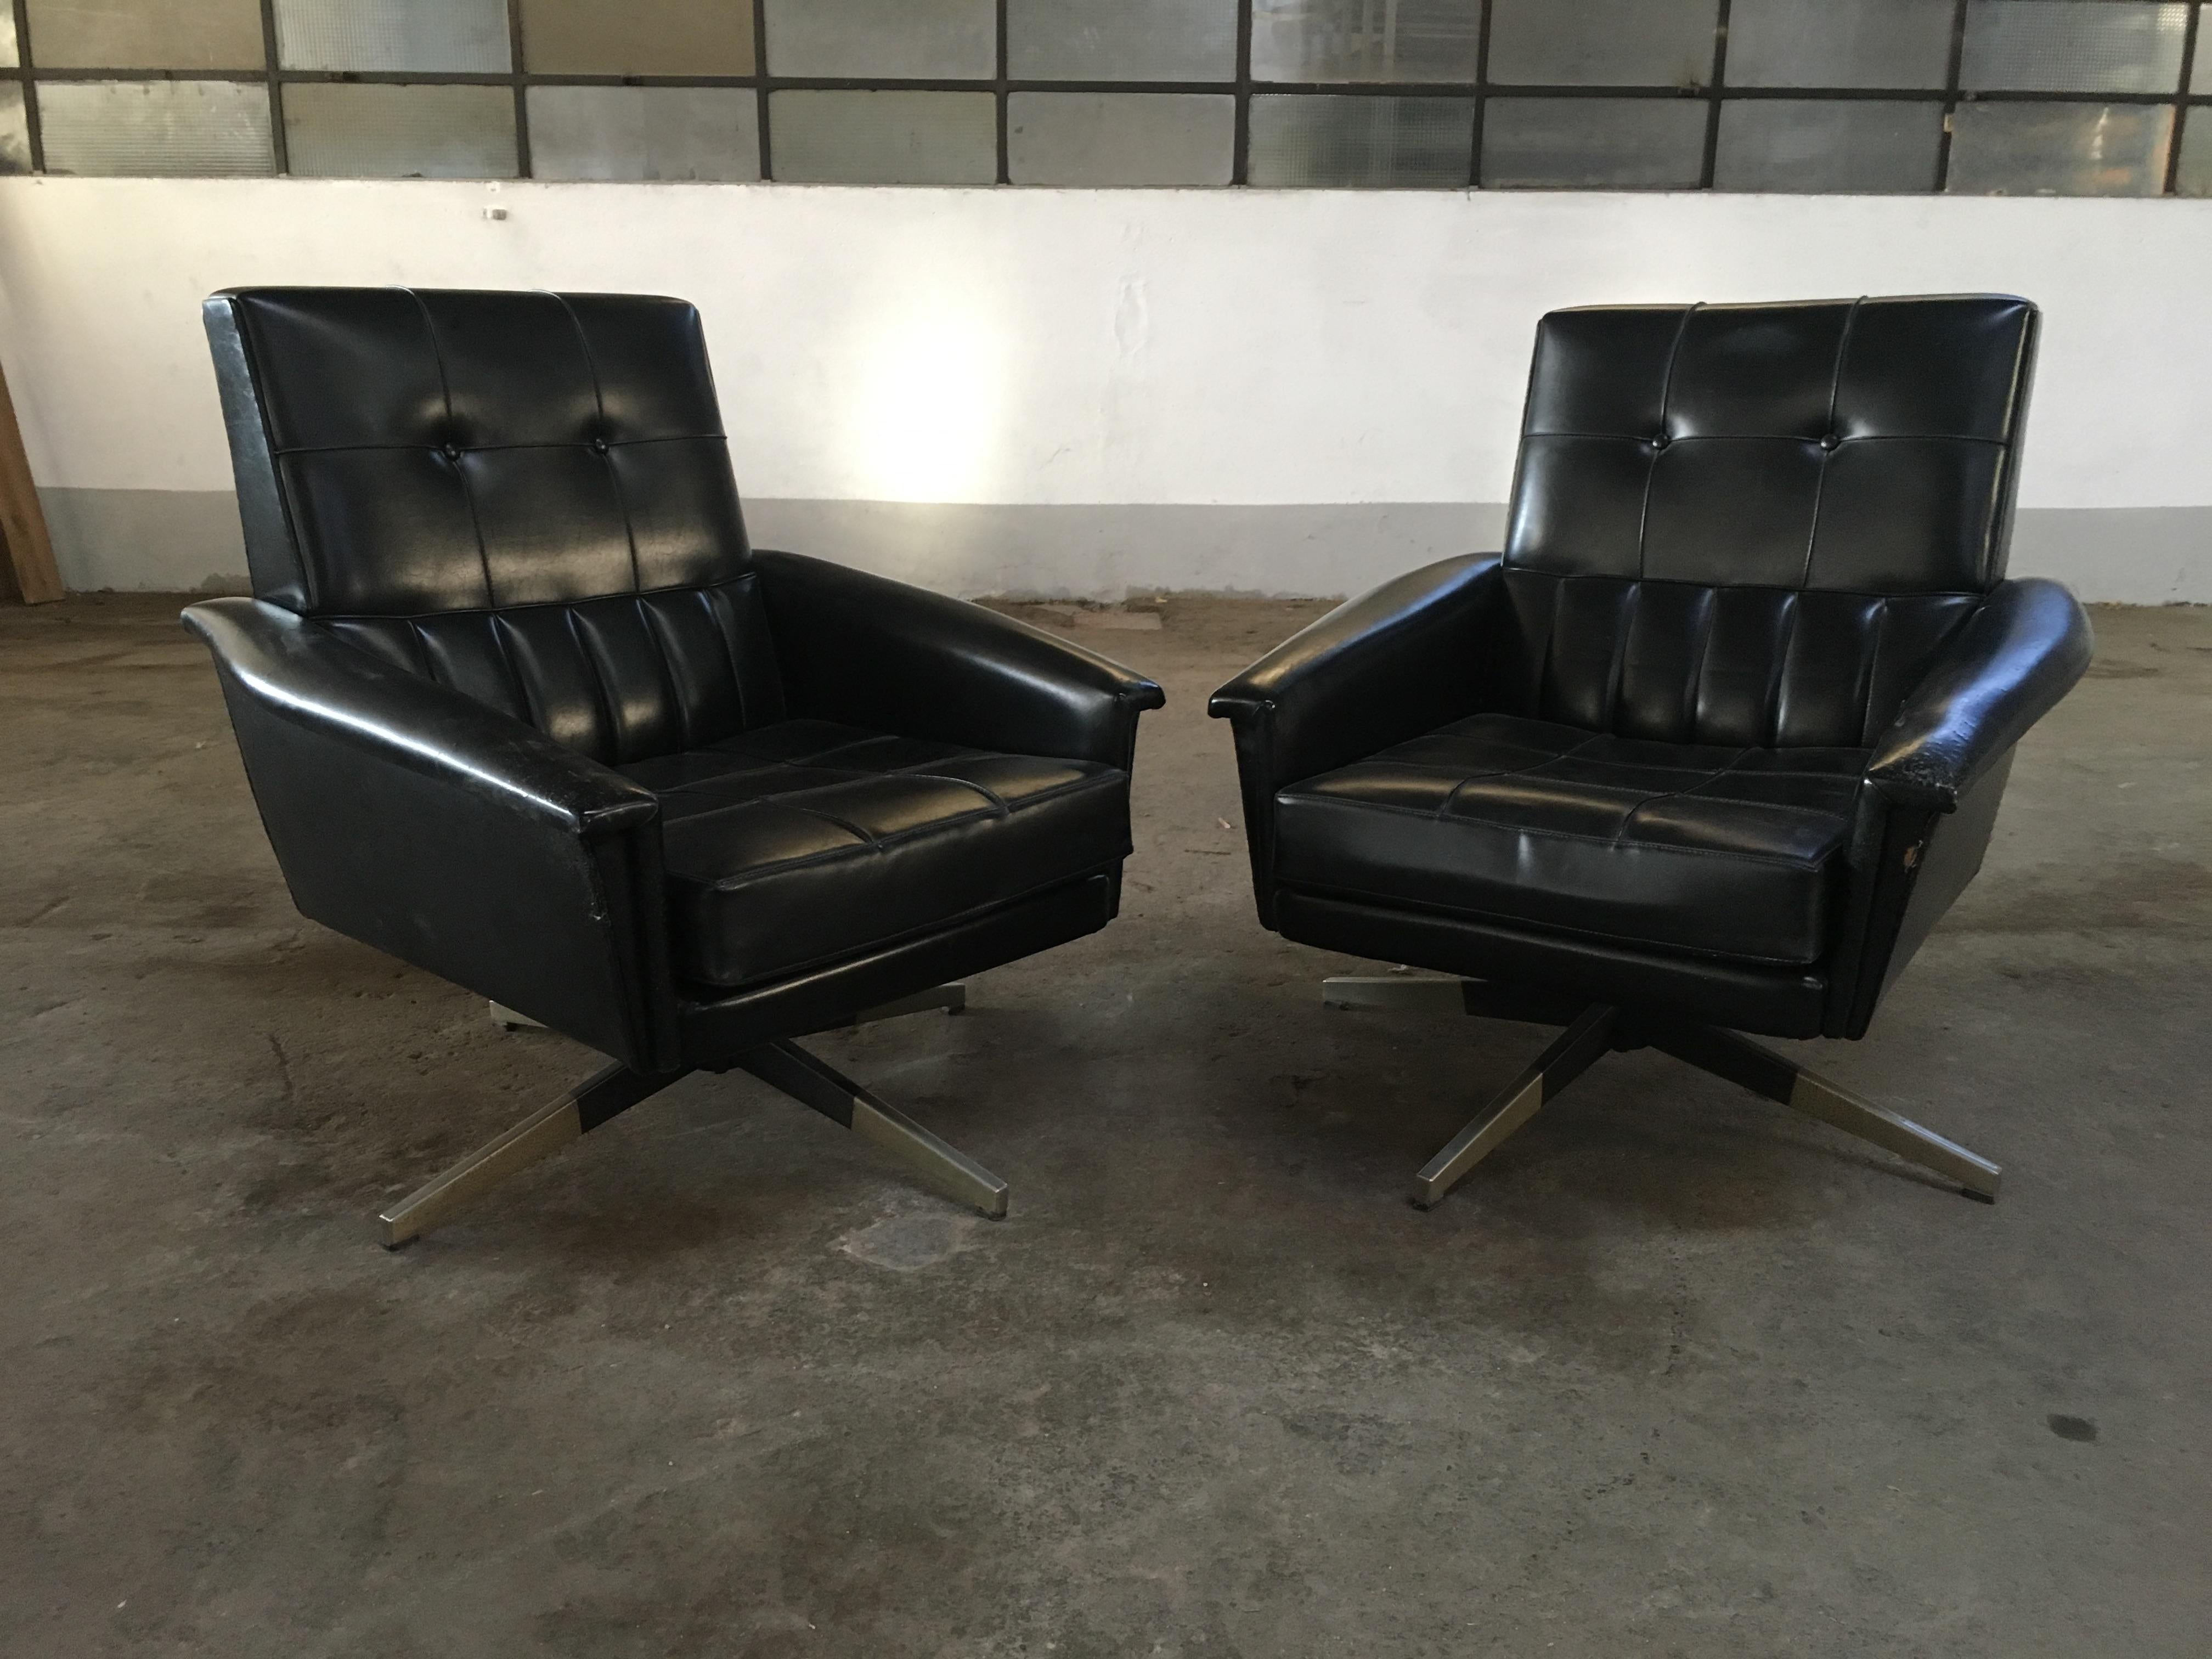 Mid-Century Modern pair of Italian revolving office armchairs in black faux leather with brass legs, 1960s.
The armchairs show some wear due to age and use. They are in general good vintage conditions.